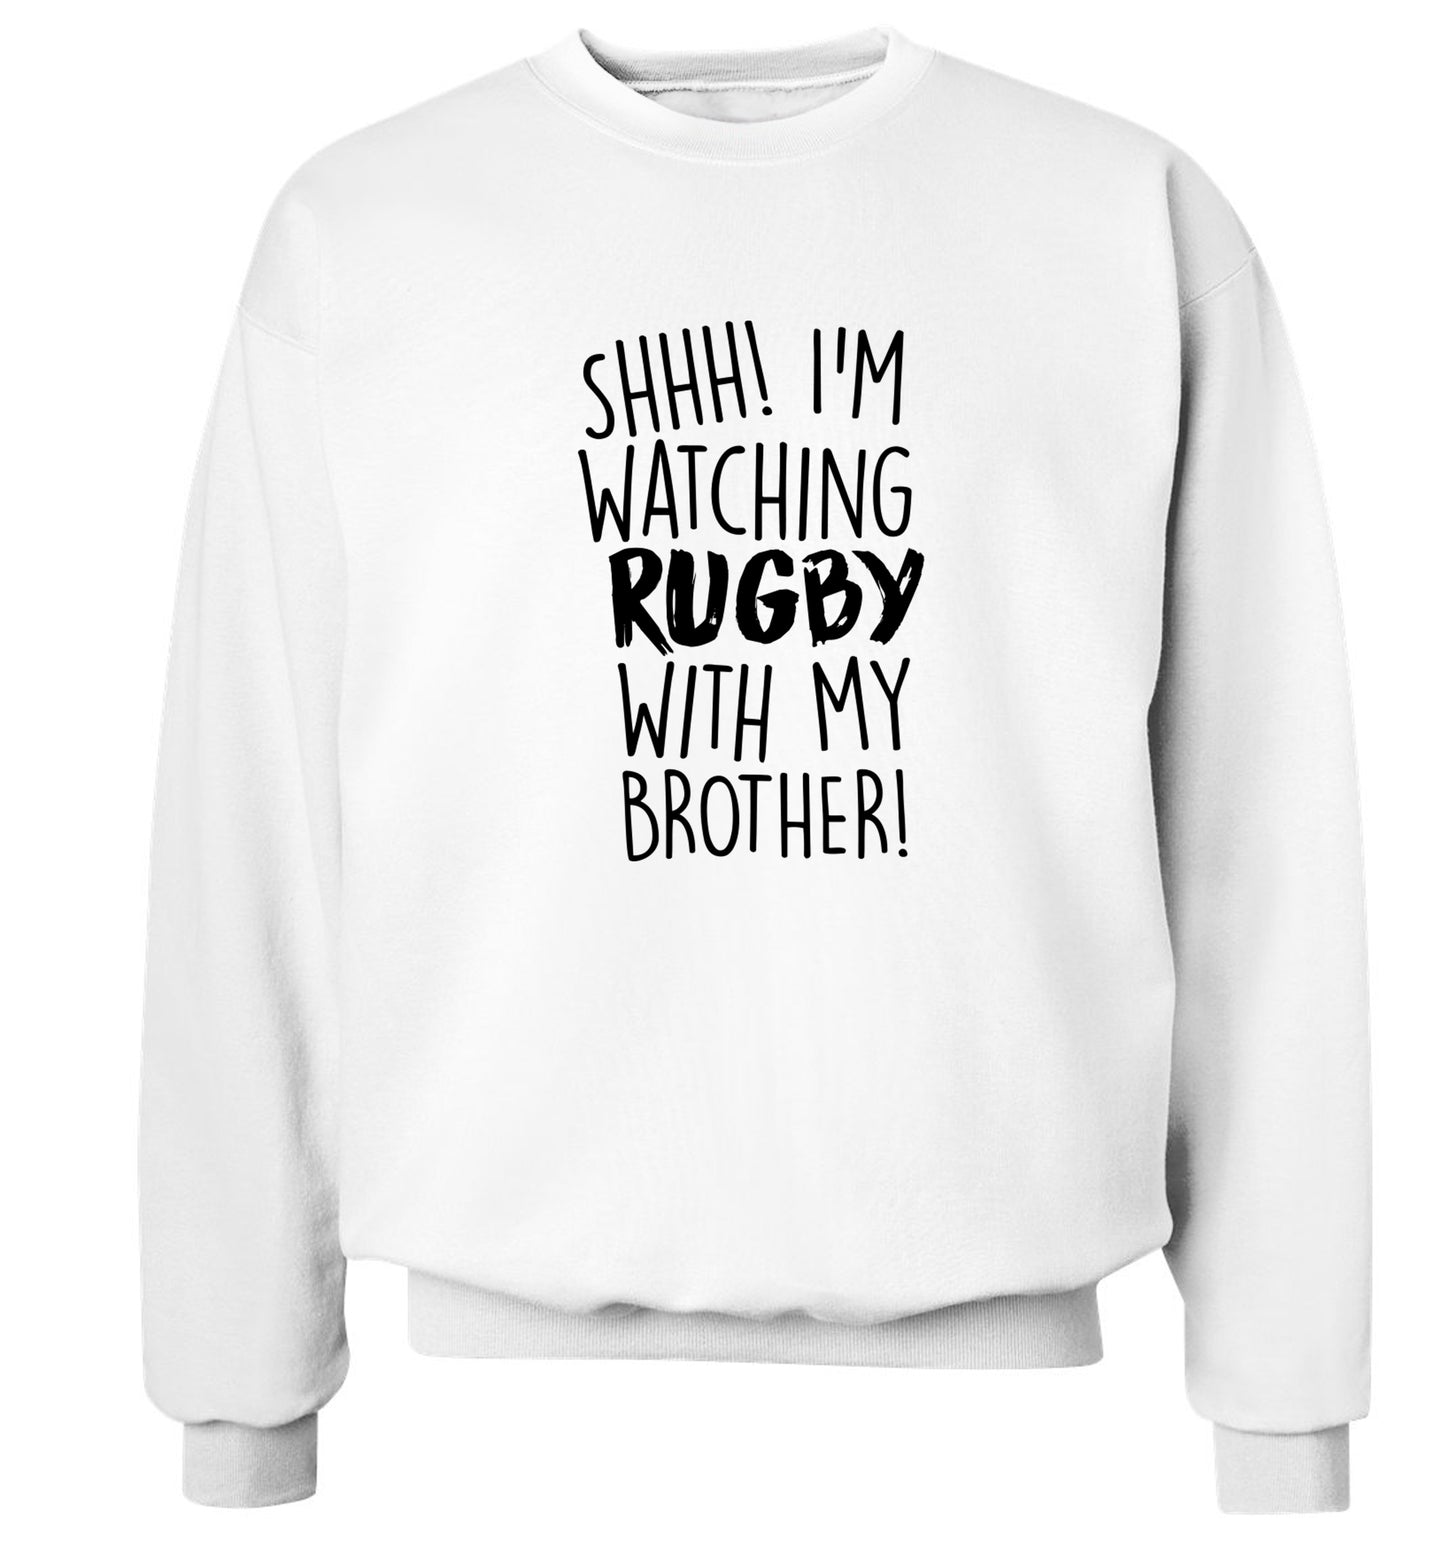 Shh... I'm watching rugby with my brother Adult's unisex white Sweater 2XL